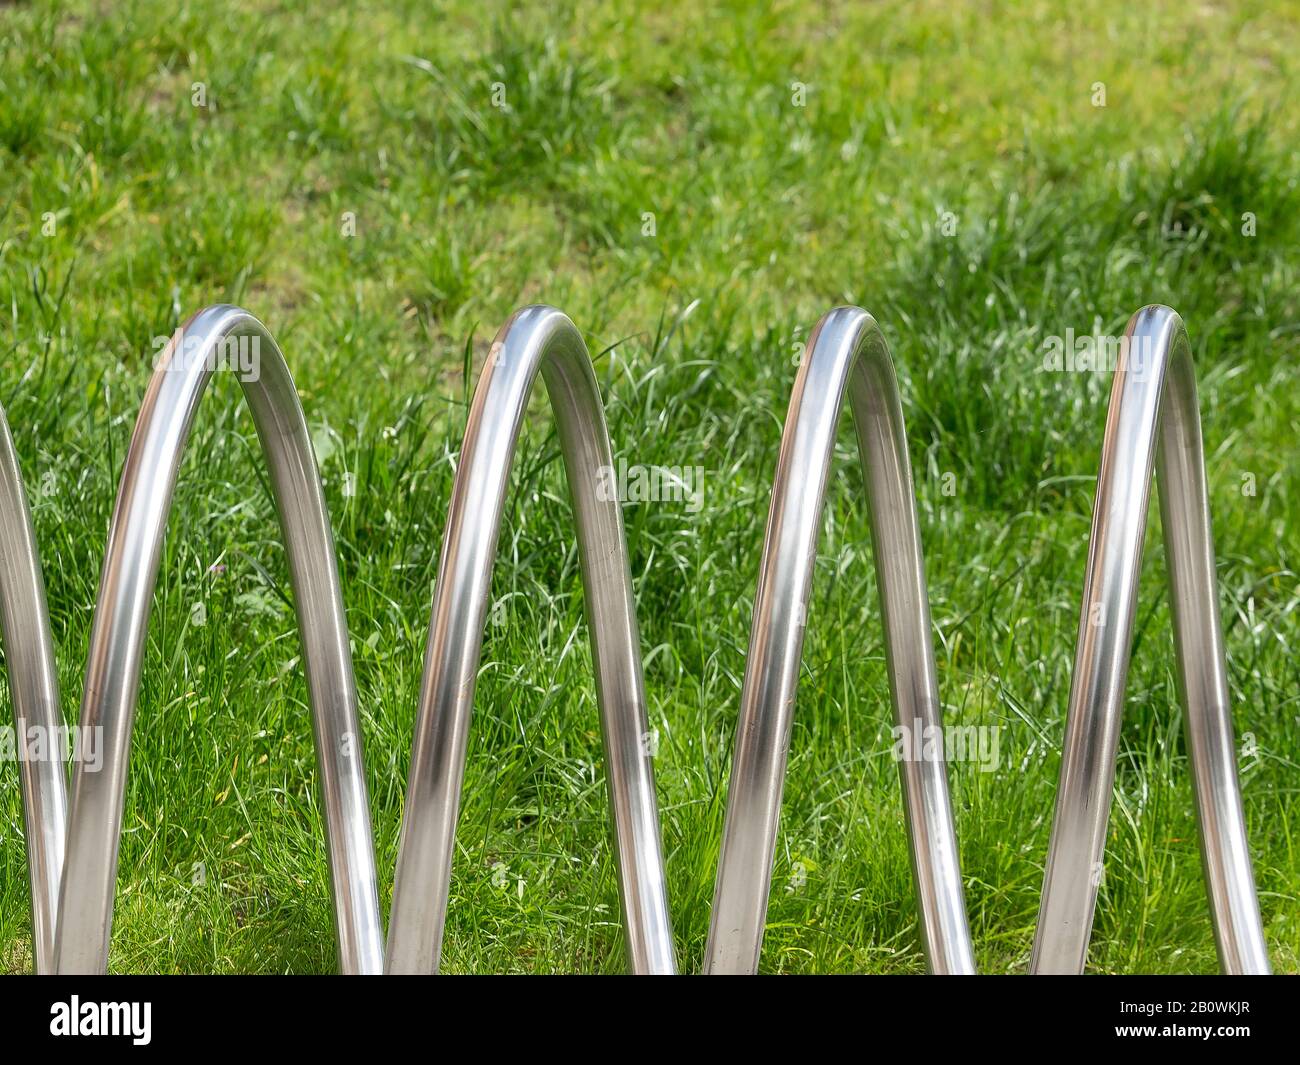 Bicycle stand Stock Photo